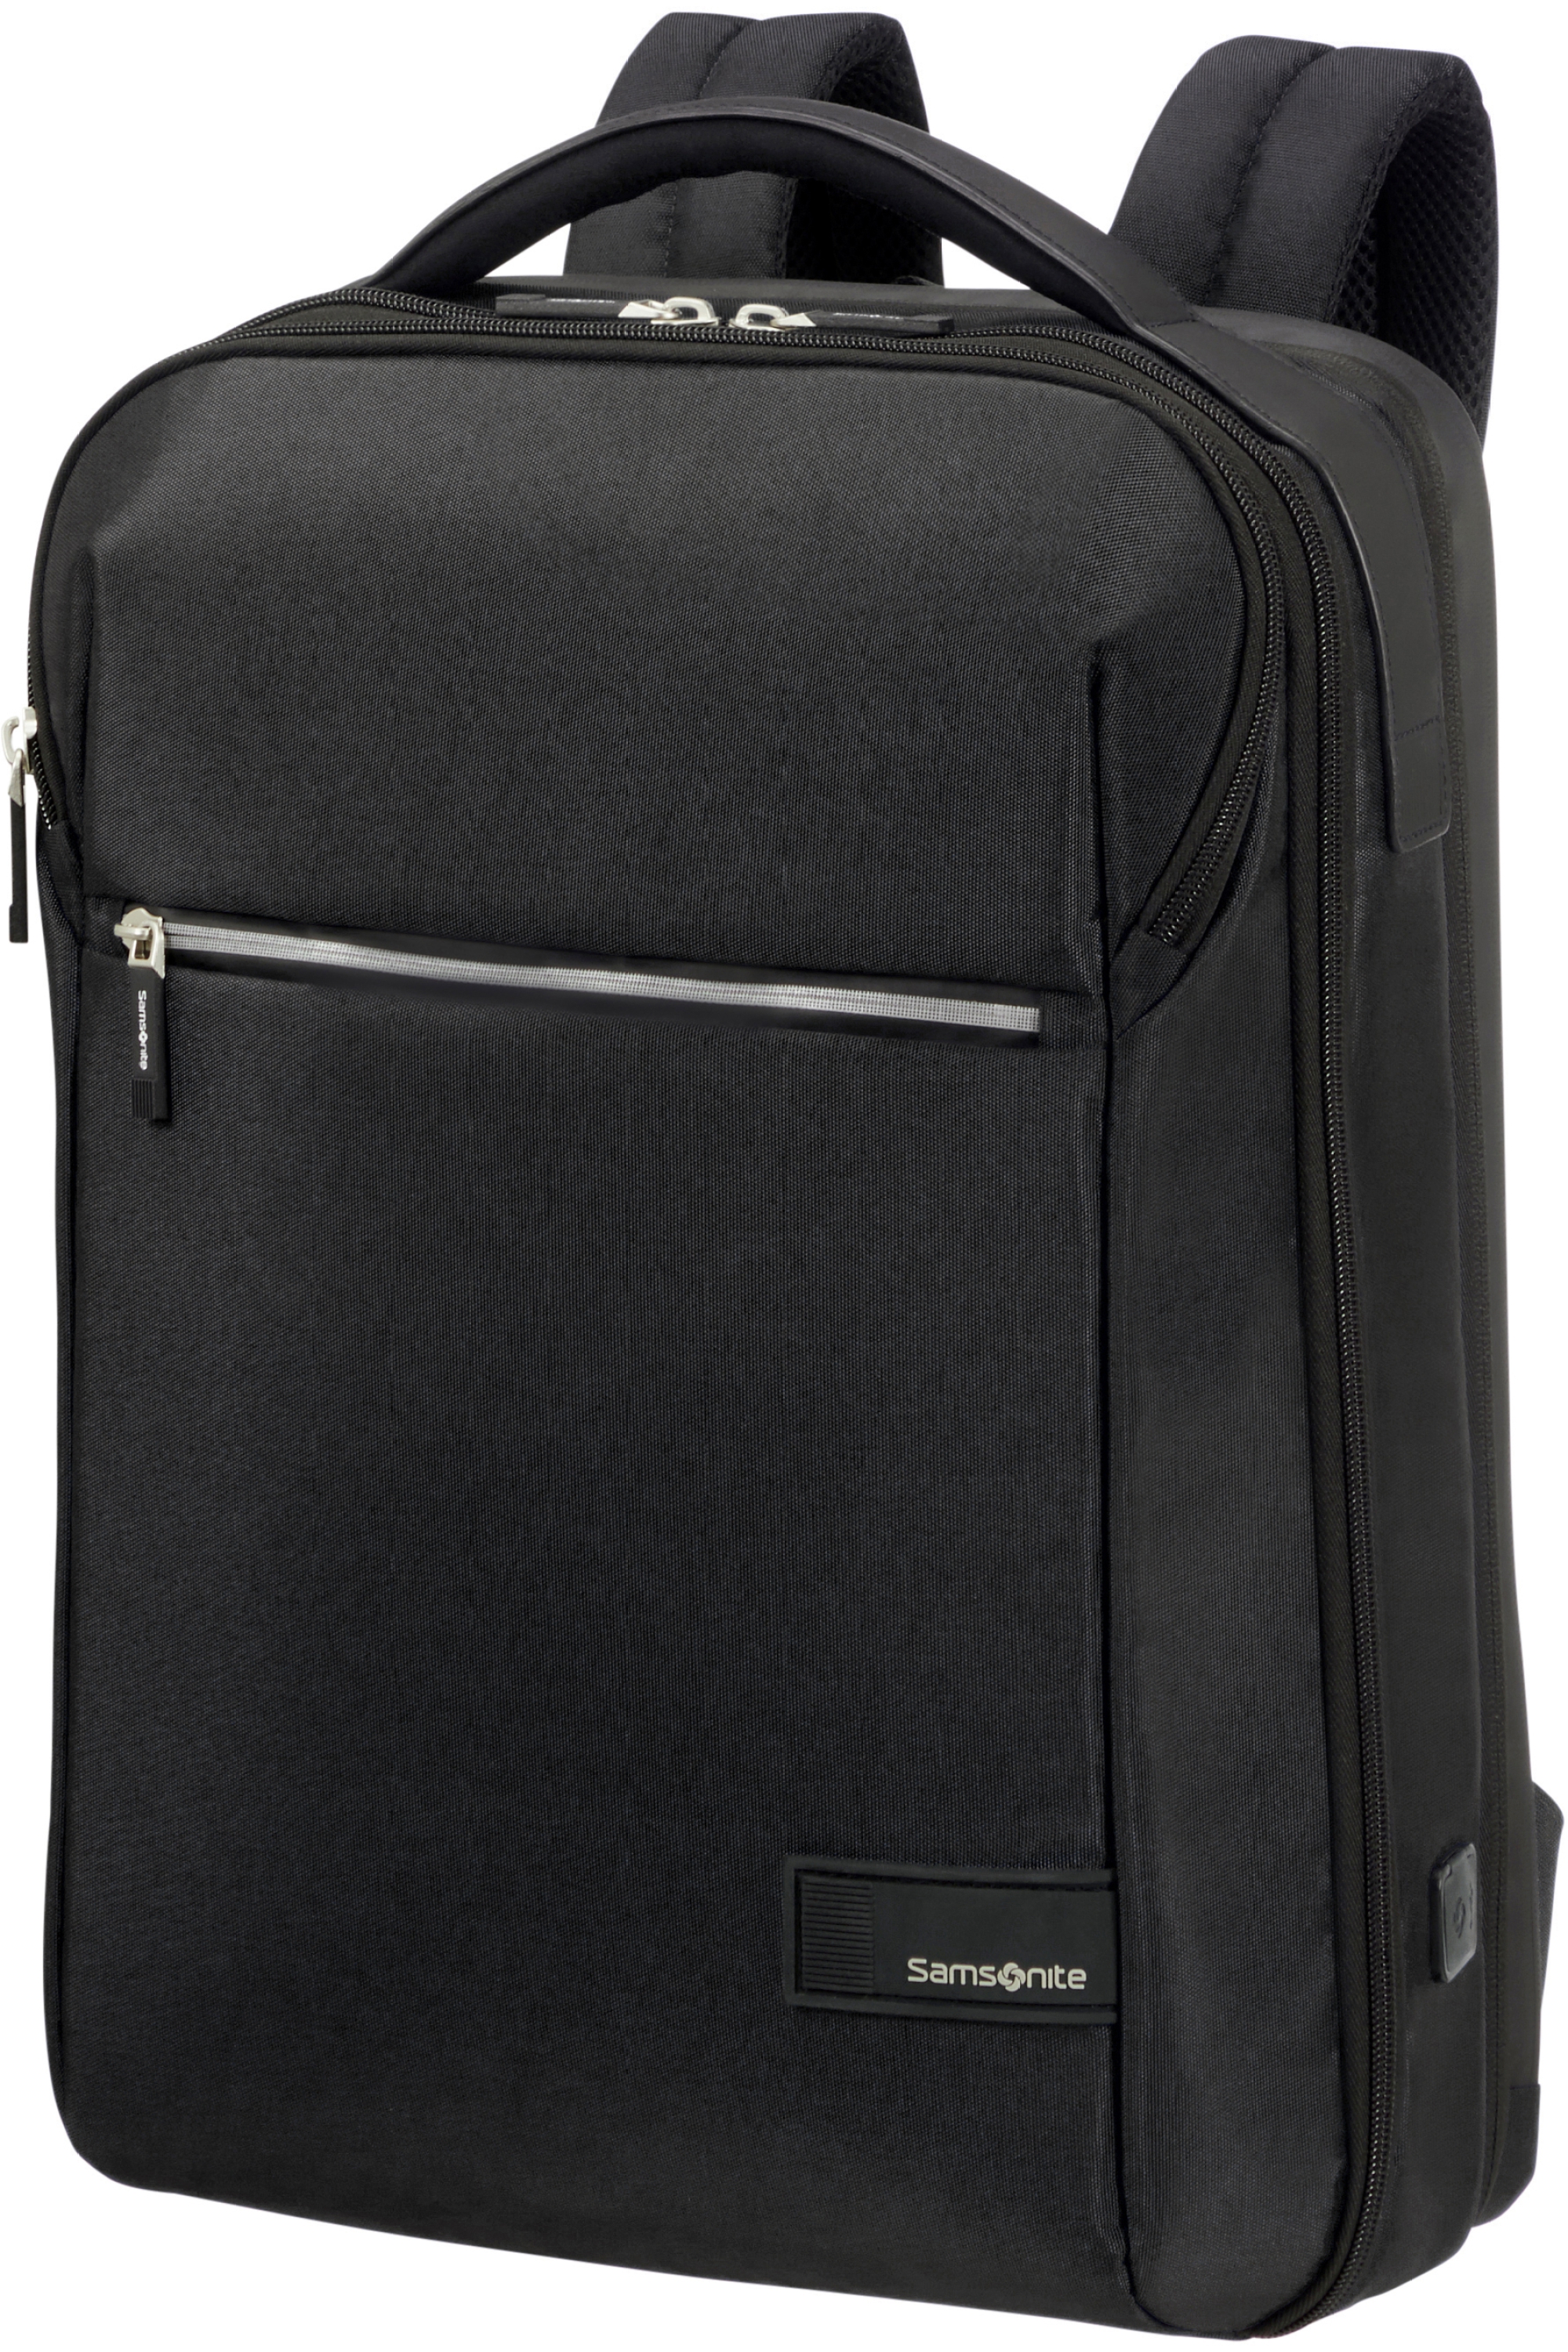 134550-1041-134550_1041_litepoint_lapt-_backpack_17-3_exp_front34-a860d17b-a9db-49fe-8747-abf800be074e-png